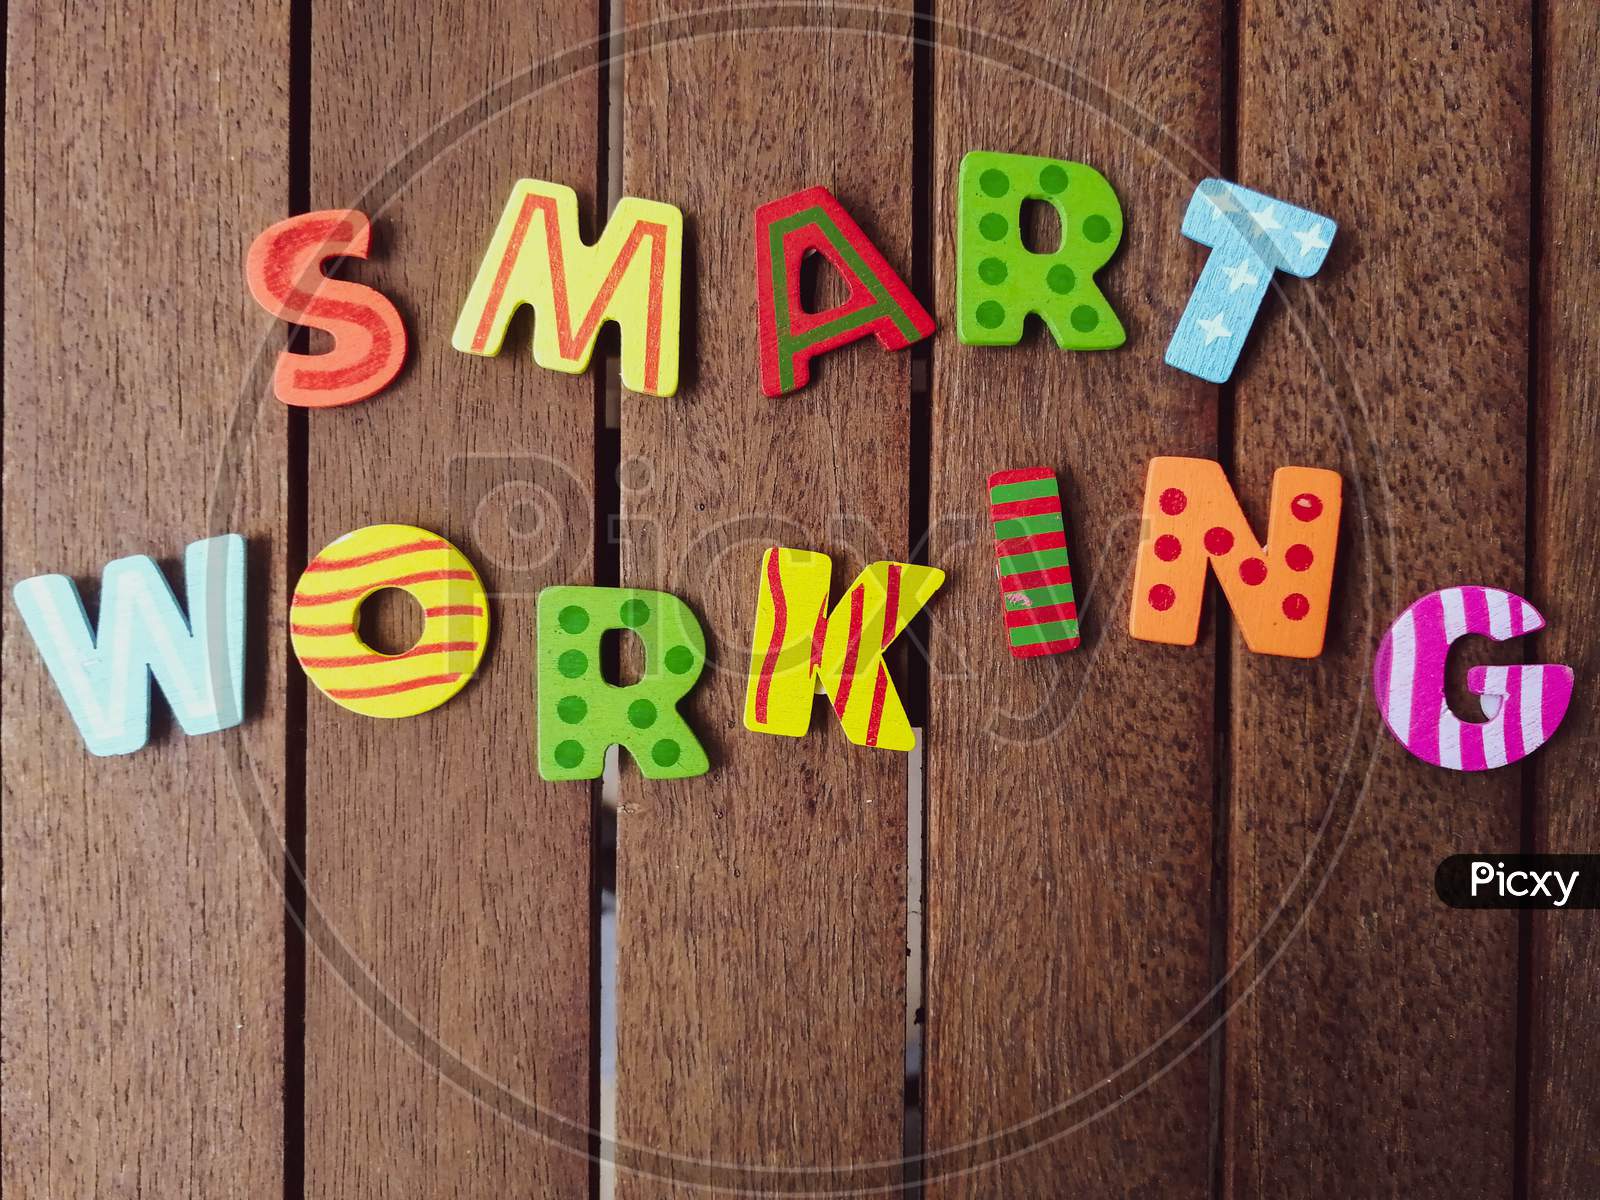 smart working letters on wood background